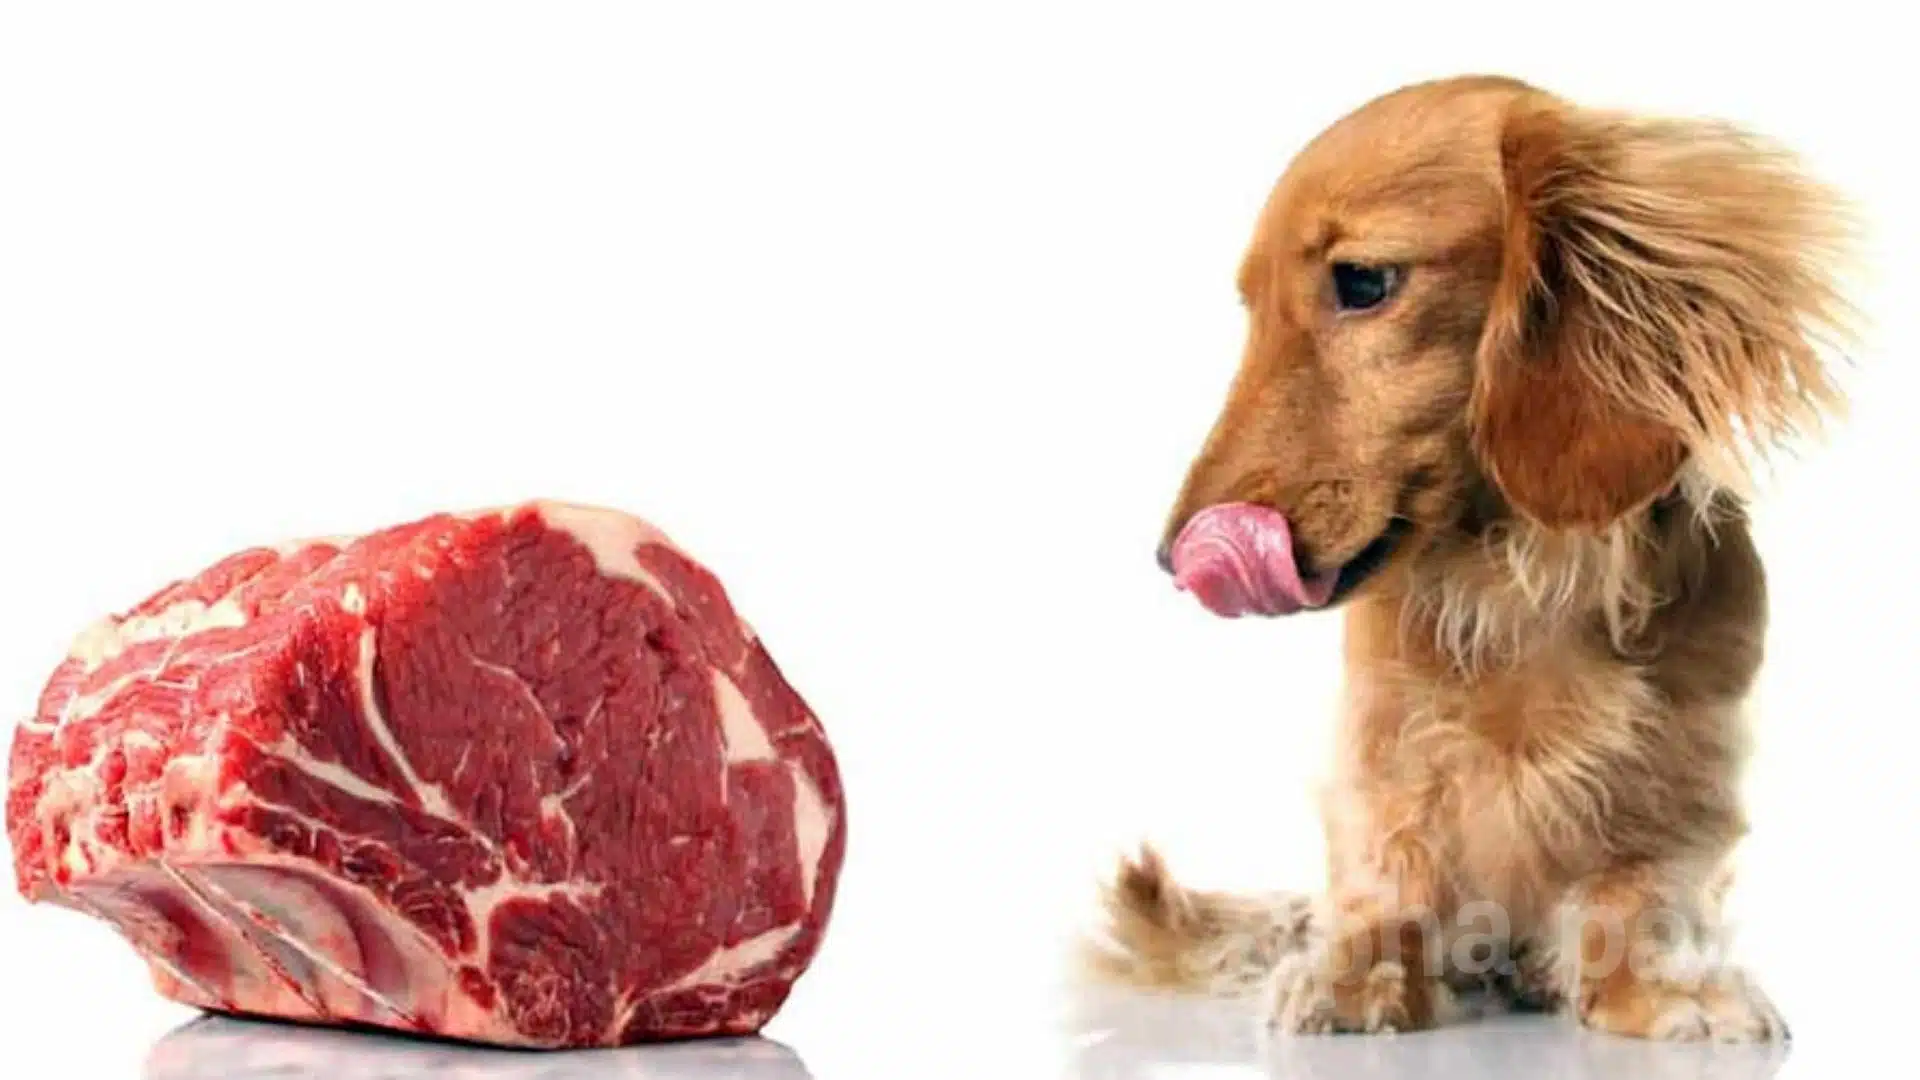 Will Too Much Protein in a Dog’s Diet Cause Health Problems?